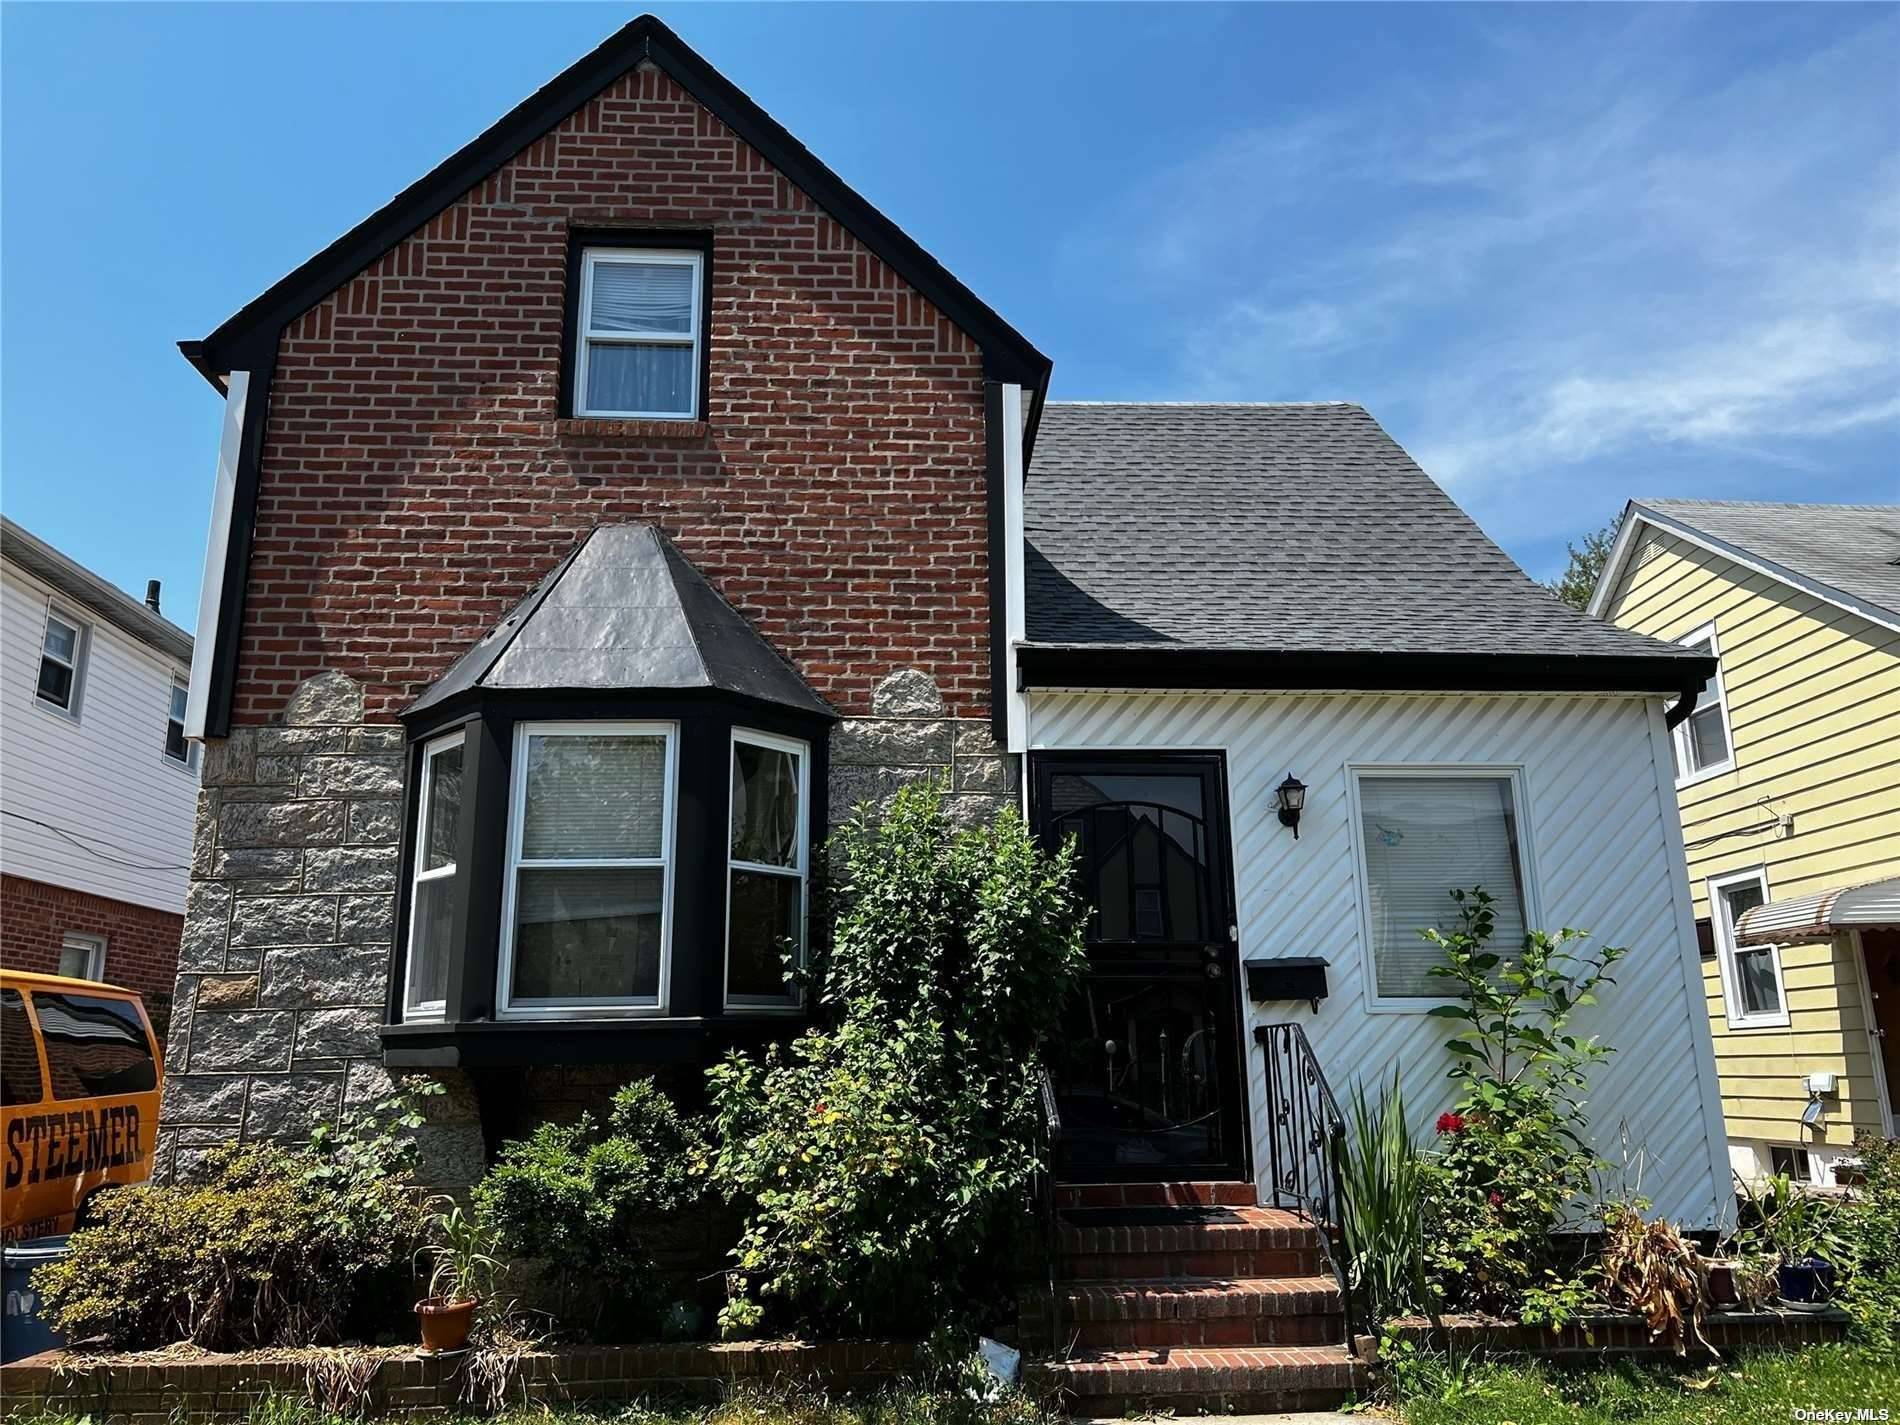 Excellent Brick 1 Family Expand cape House in Queens Village with spacious 5 Bedroom, Living Room, Formal Dining Room, Eat in Kitchen, 3 Full Bath.